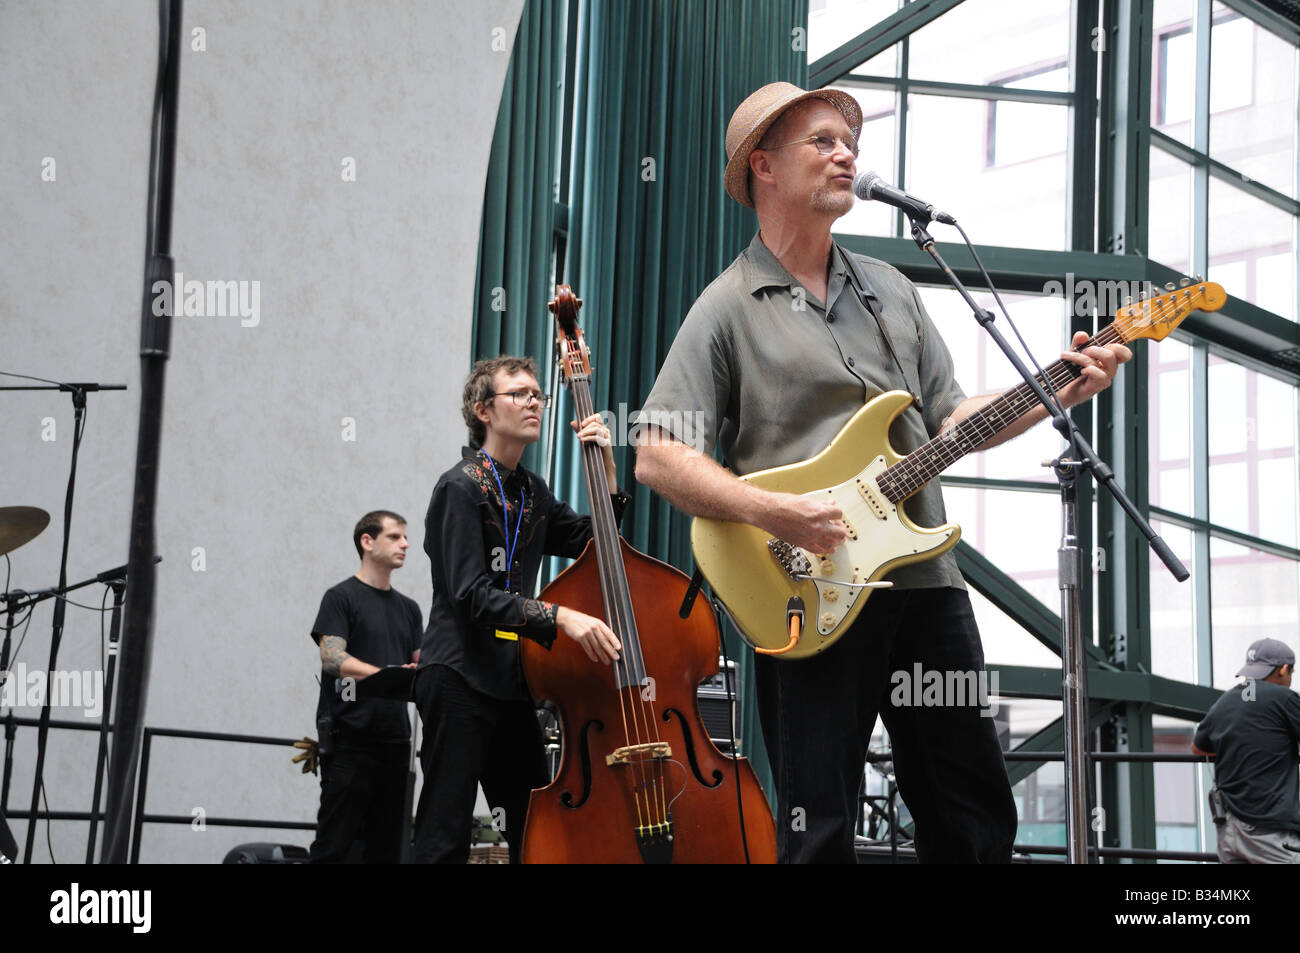 Marshall Crenshaw and other musicians rehearsing for a pop/folk concert at the Winter Garden in Battery Park City, Manhattan. Stock Photo